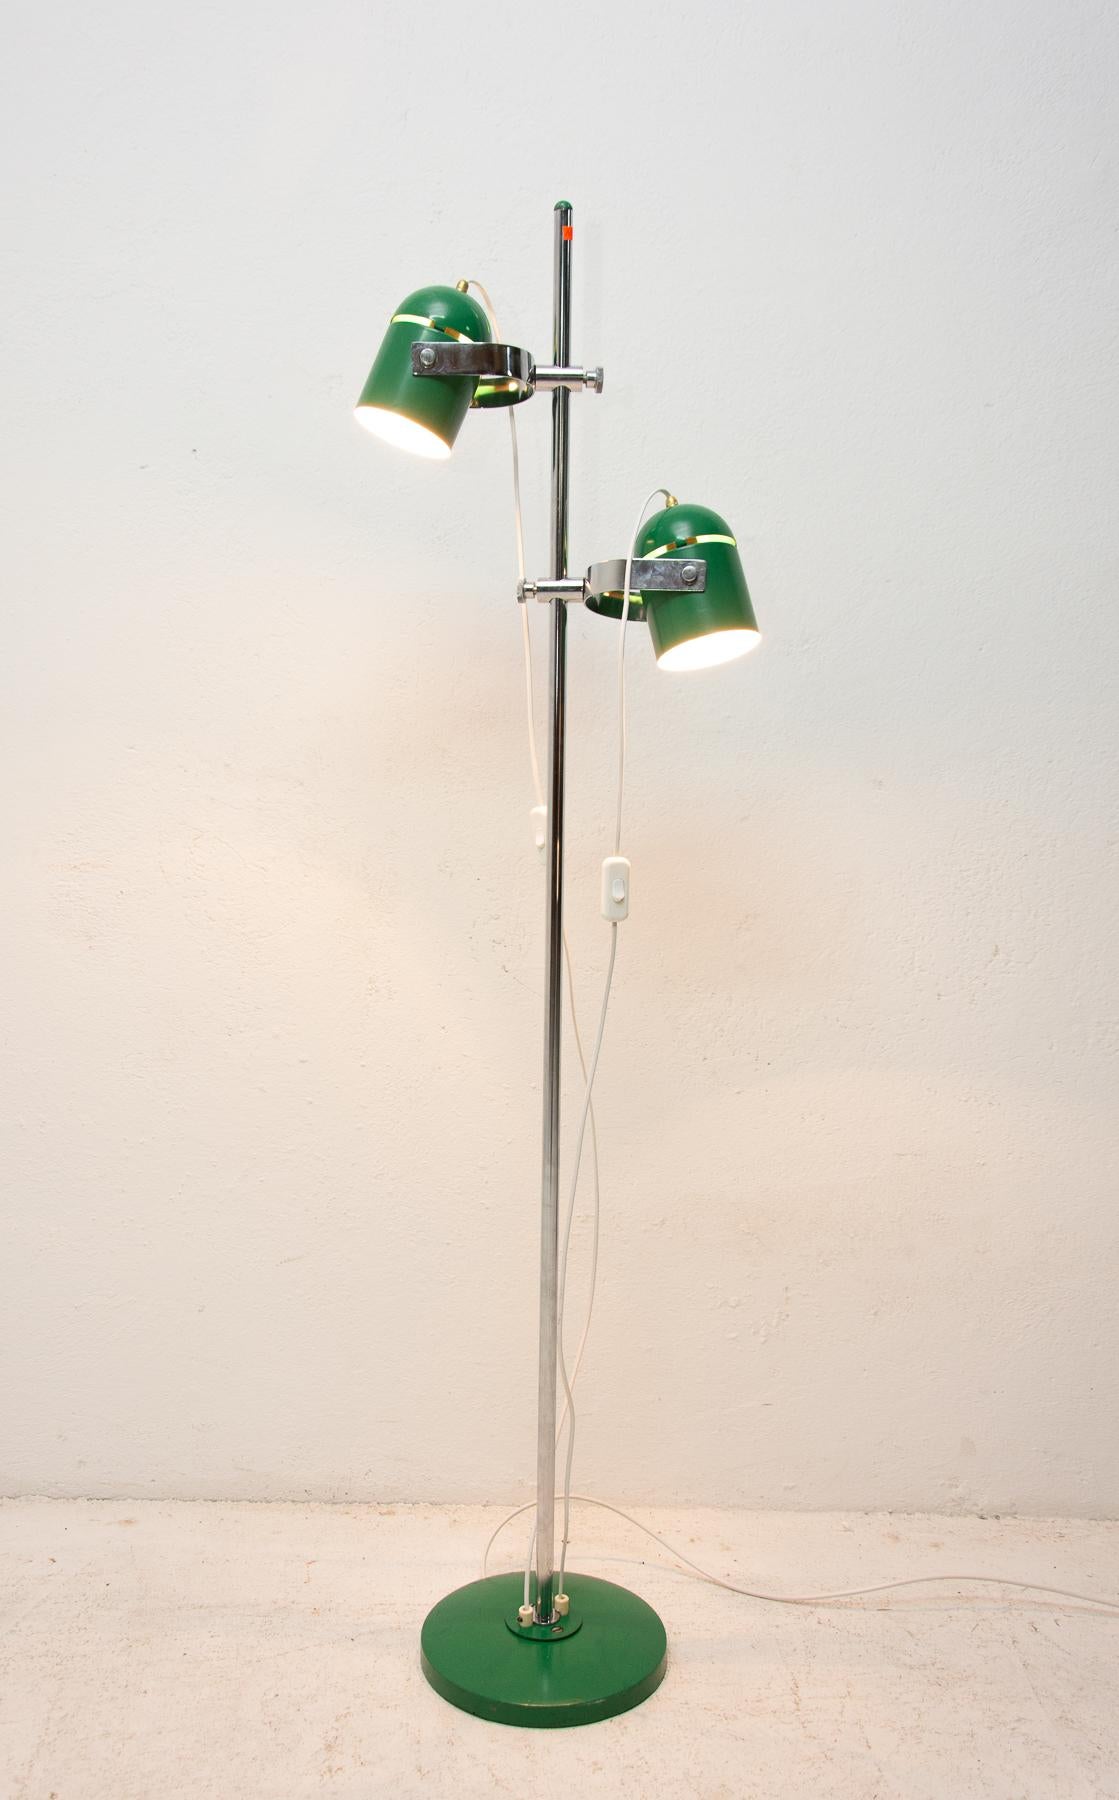 Elegant floor lamp or spotlight from the 1970s, it was designed by Stanislav Indra-famous Czechoslovak designer. Great fitting, that allows the lamp heads to adjust up and down along the post. Turned aluminum tapered bell-shaped shade. The center